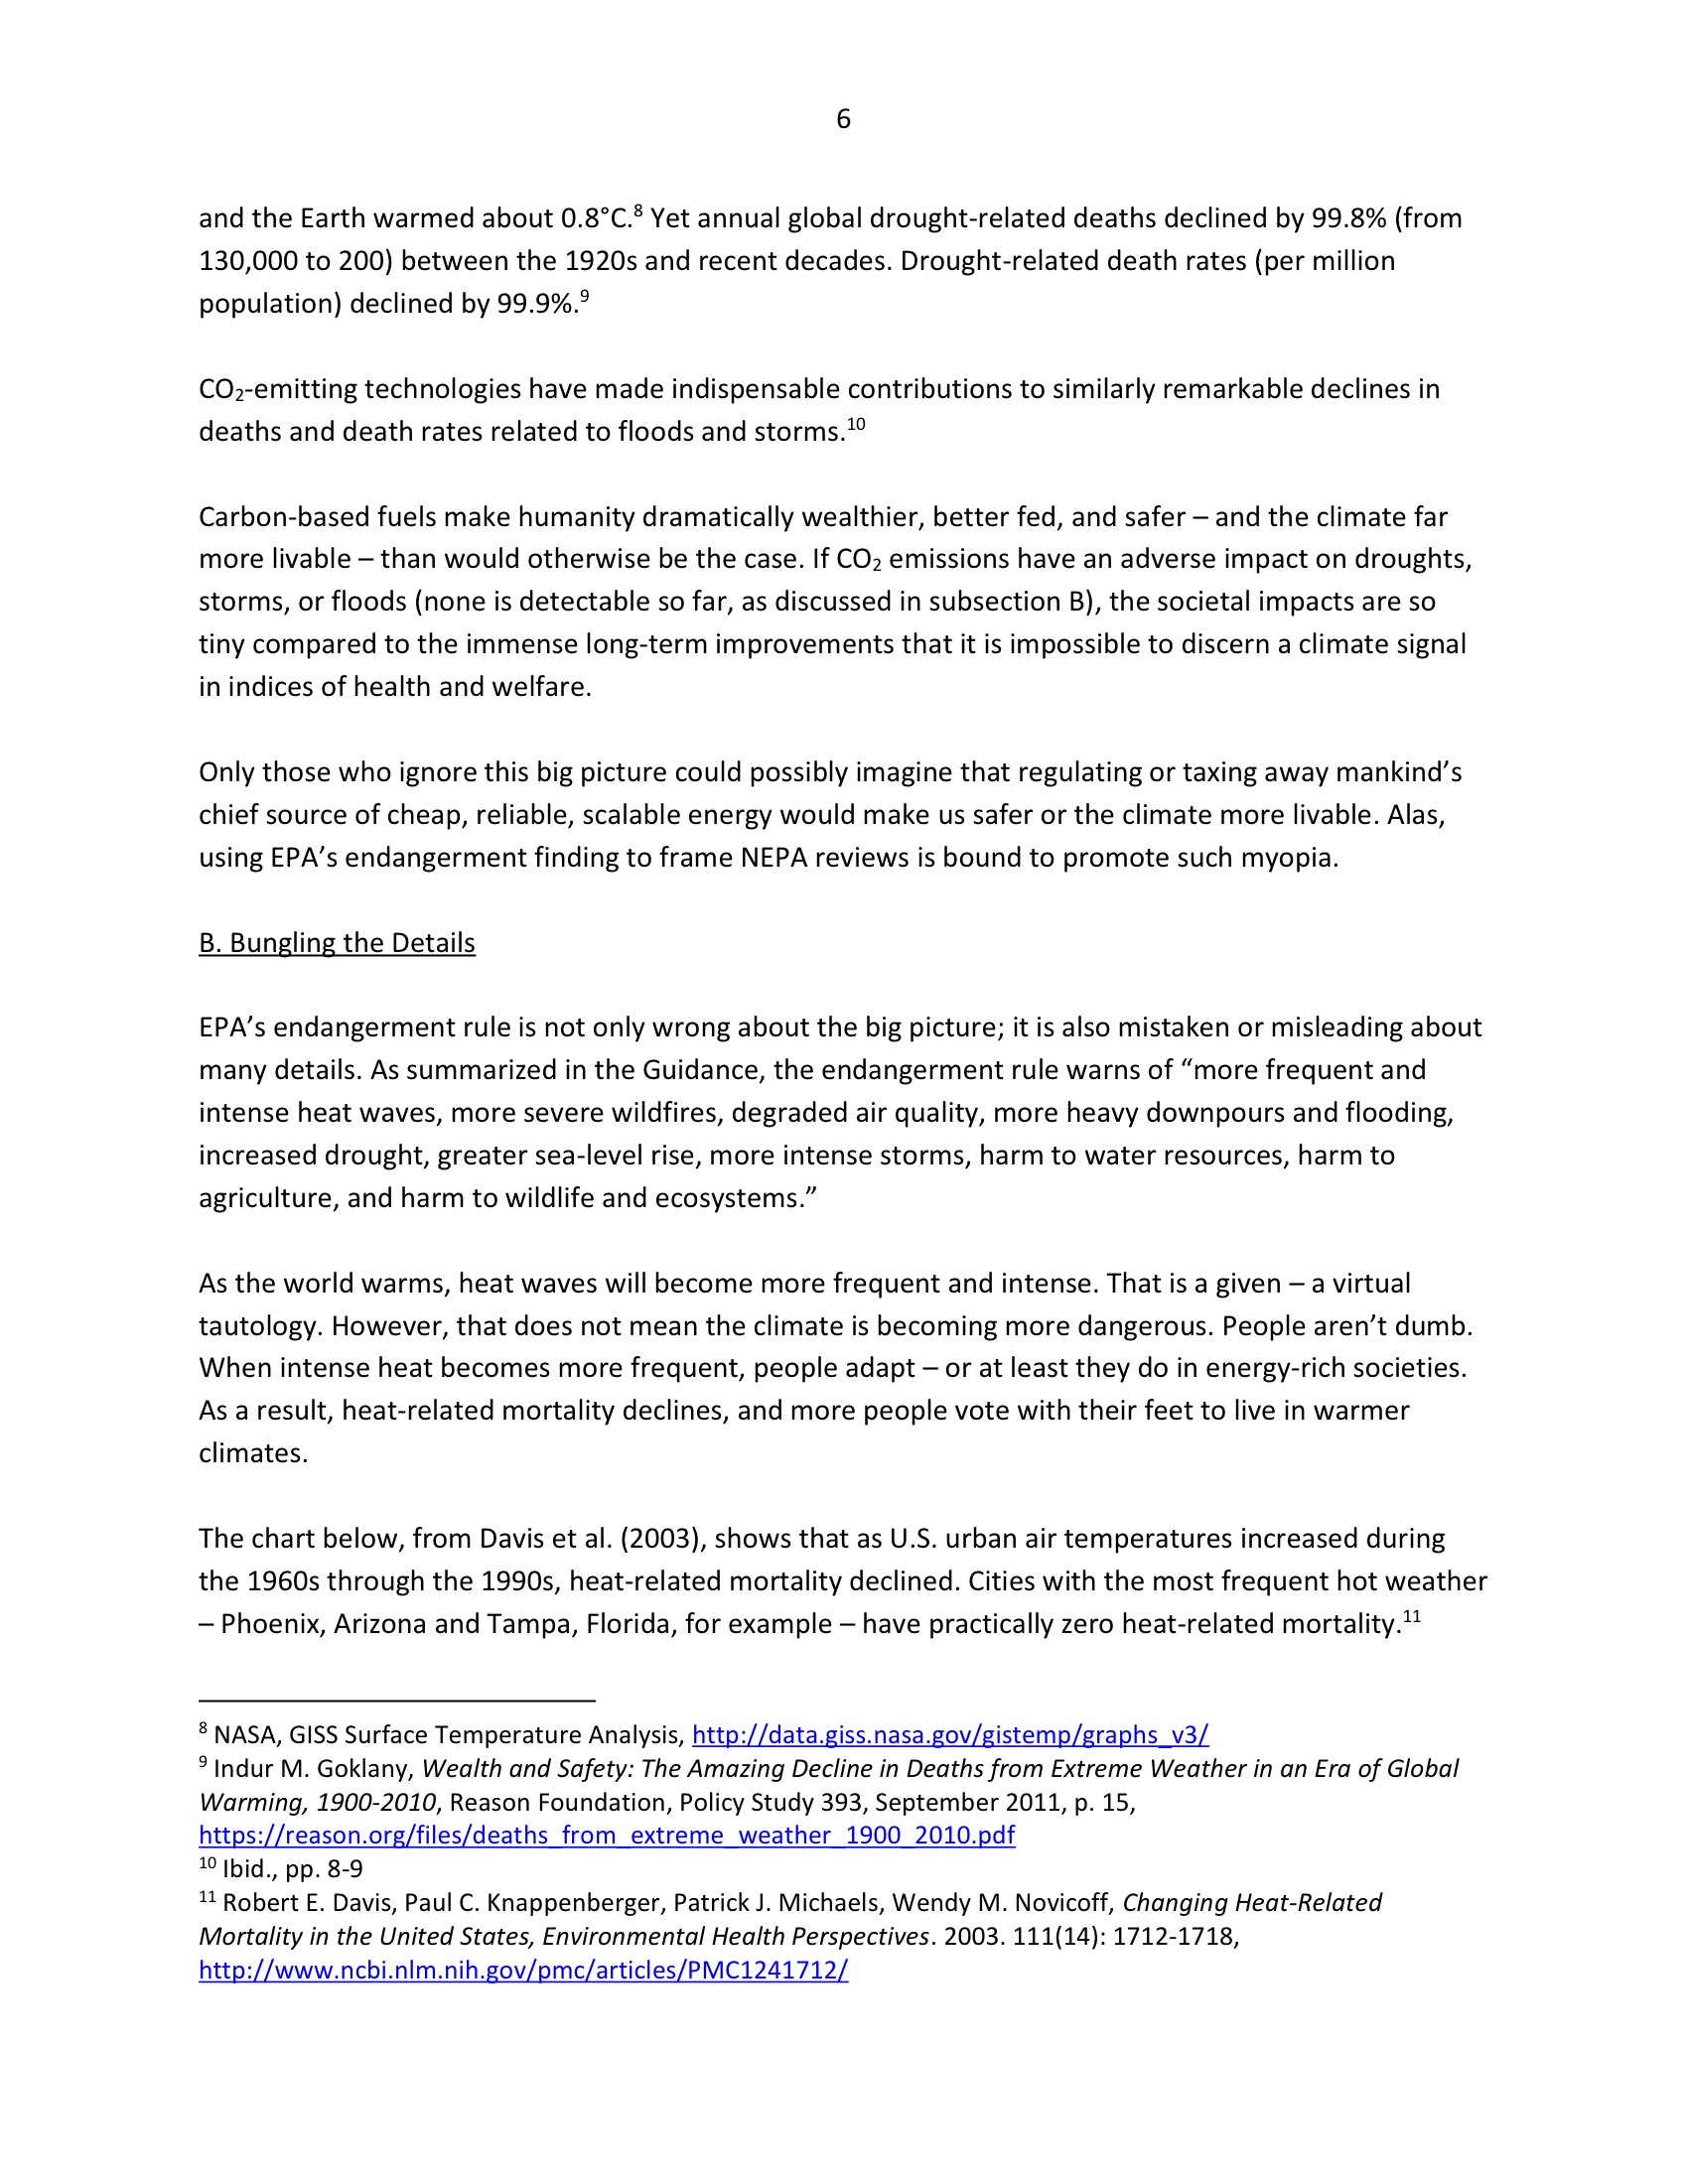 Marlo Lewis Competitive Enterprise Institute and Free Market Allies Comment Letter on NEPA GHG Guidance Document 78-6